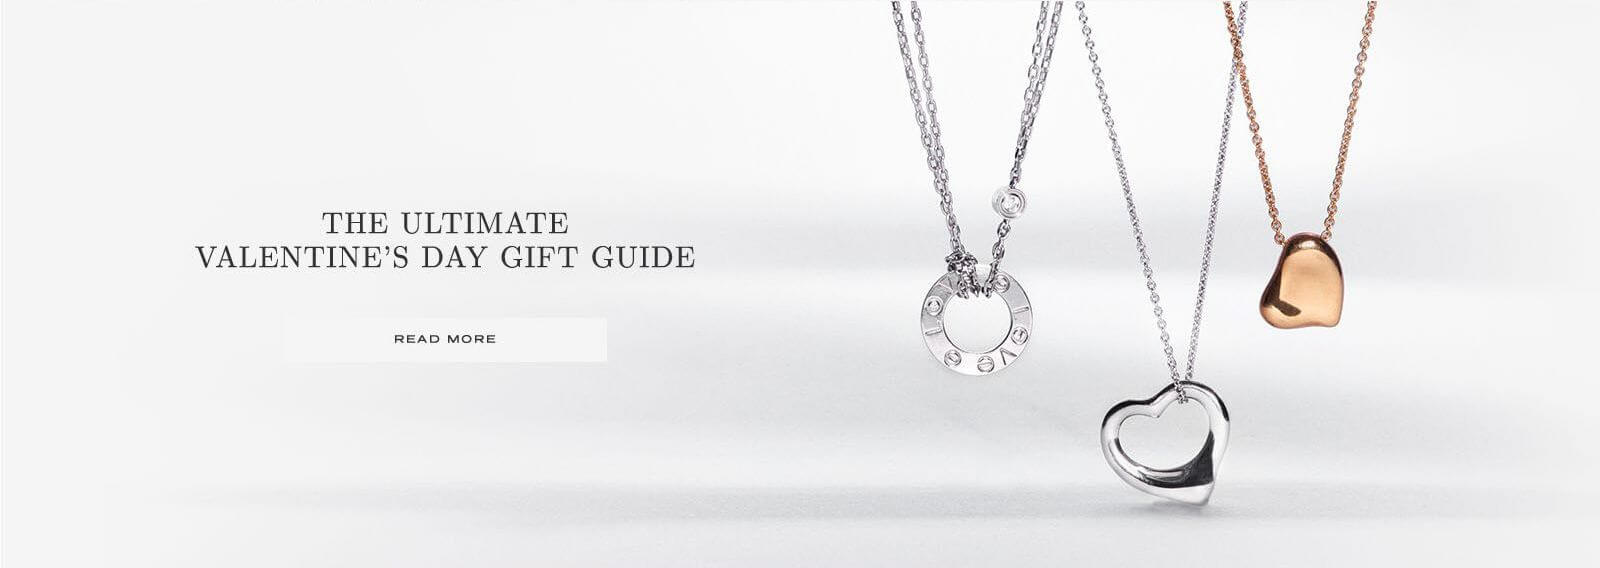 Valentines day gifts guide